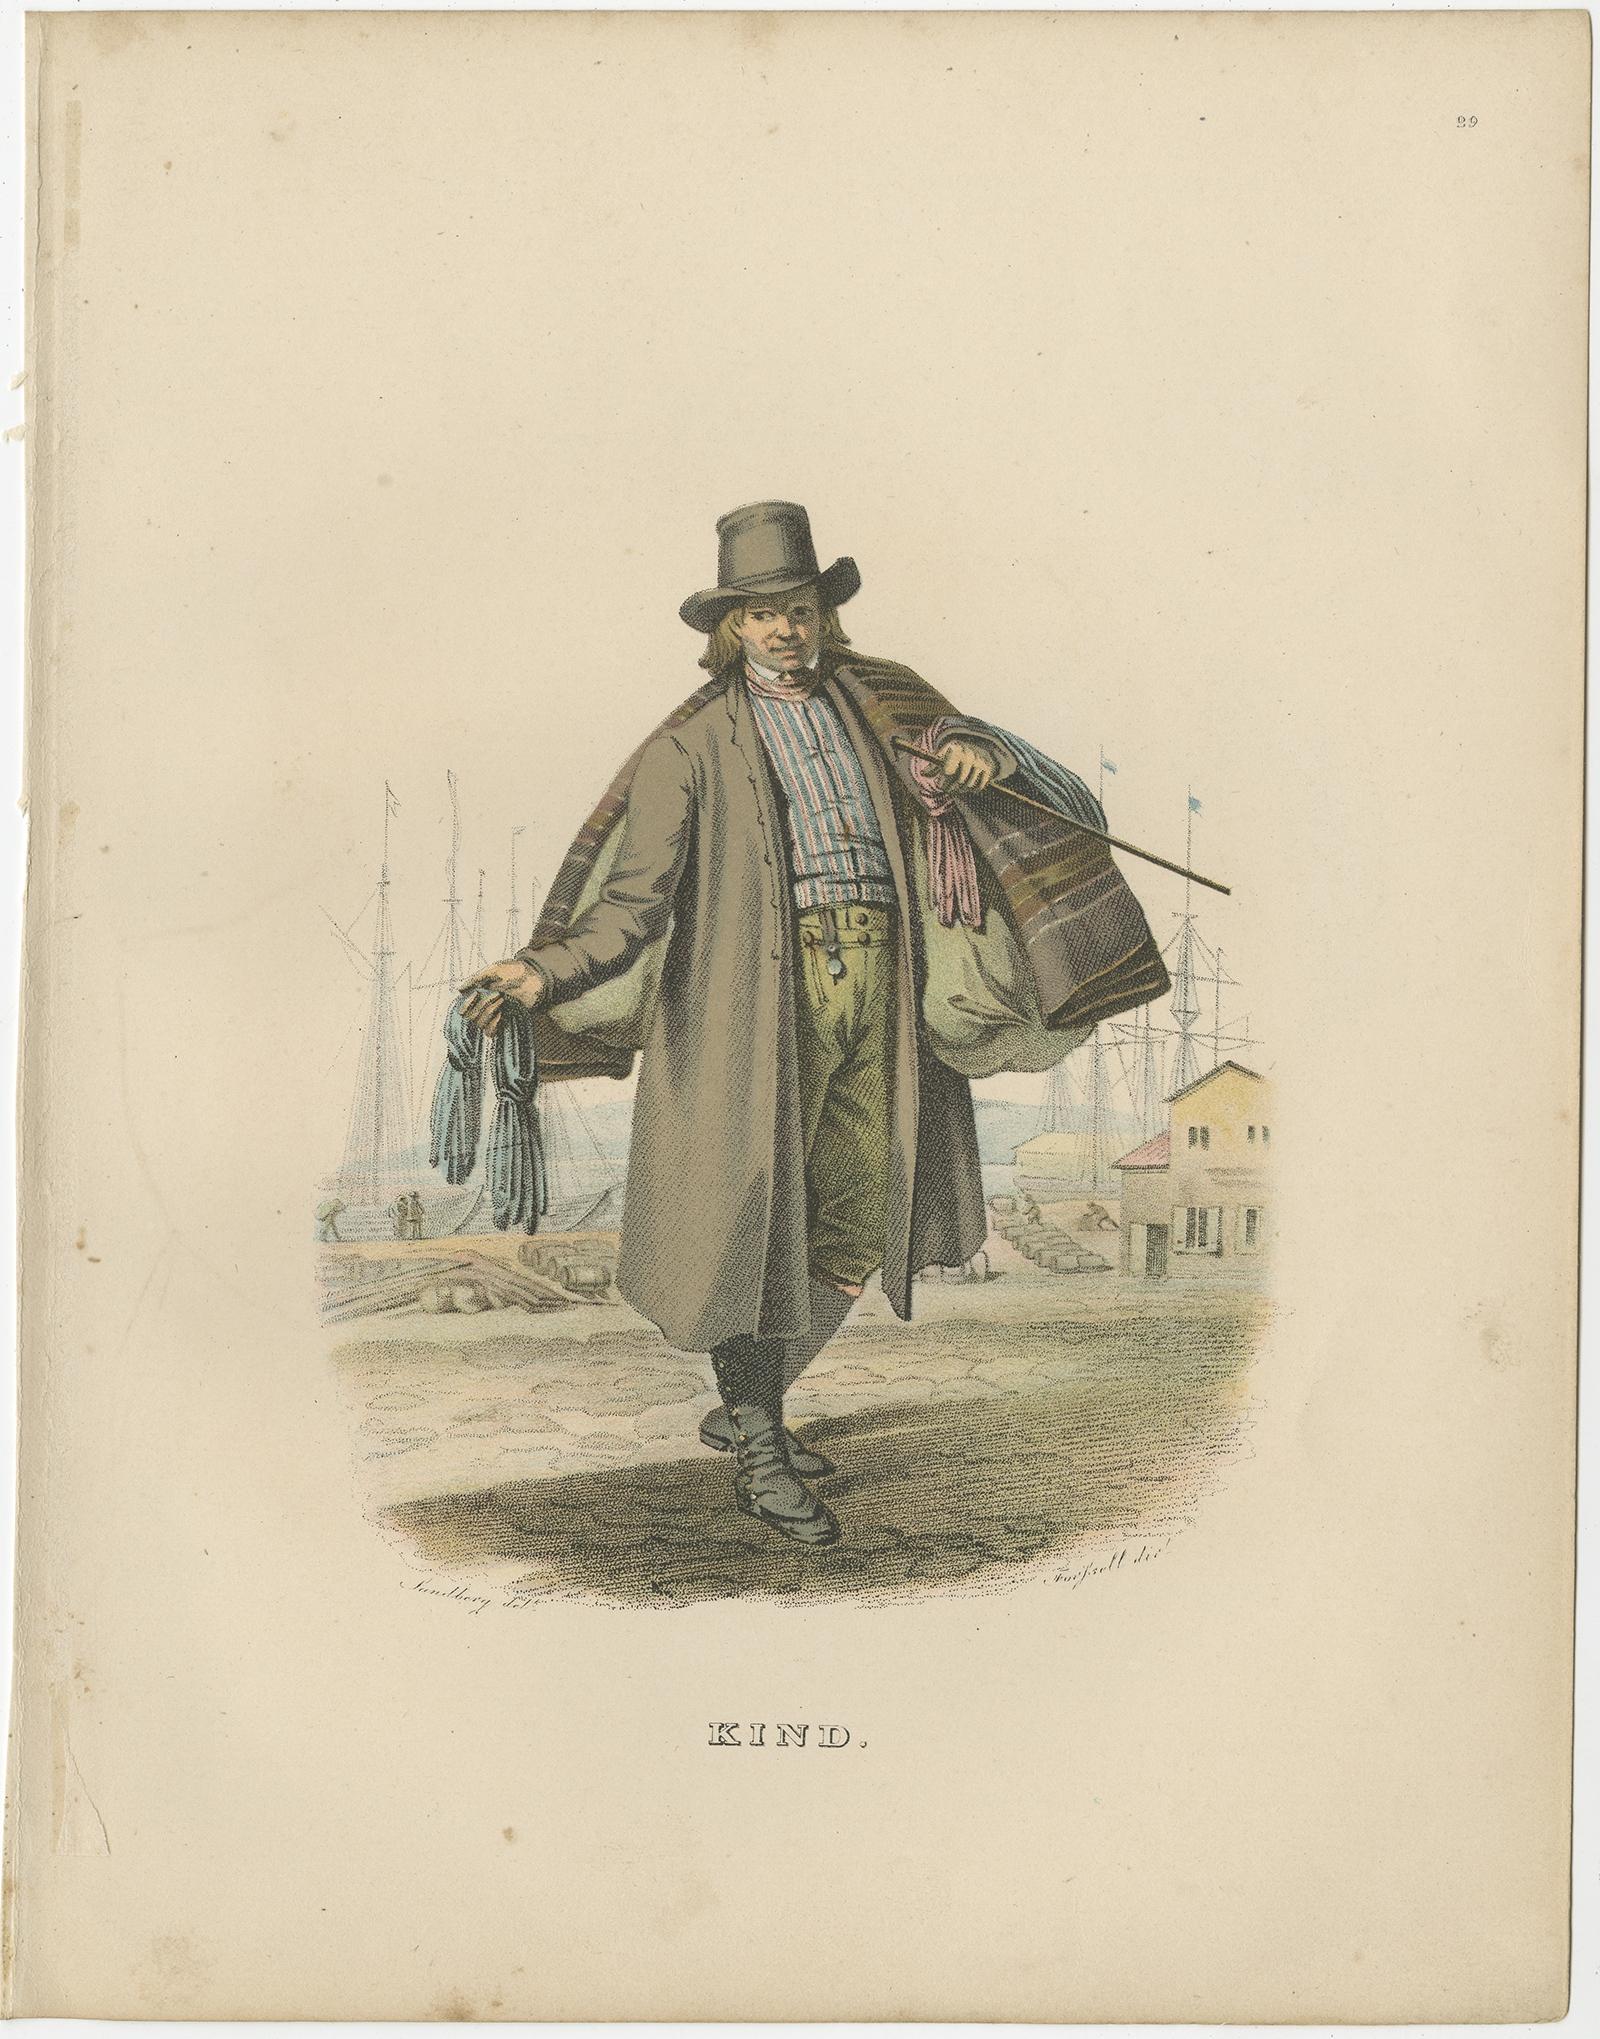 Antique print titled 'Kind'. Costume print of Västergötland, Sweden. This print originates from 'Ett år i Sverige' by J.G. Sandberg.

Västergötland is home to Gothenburg, the second largest city in Sweden, which is situated along a short stretch